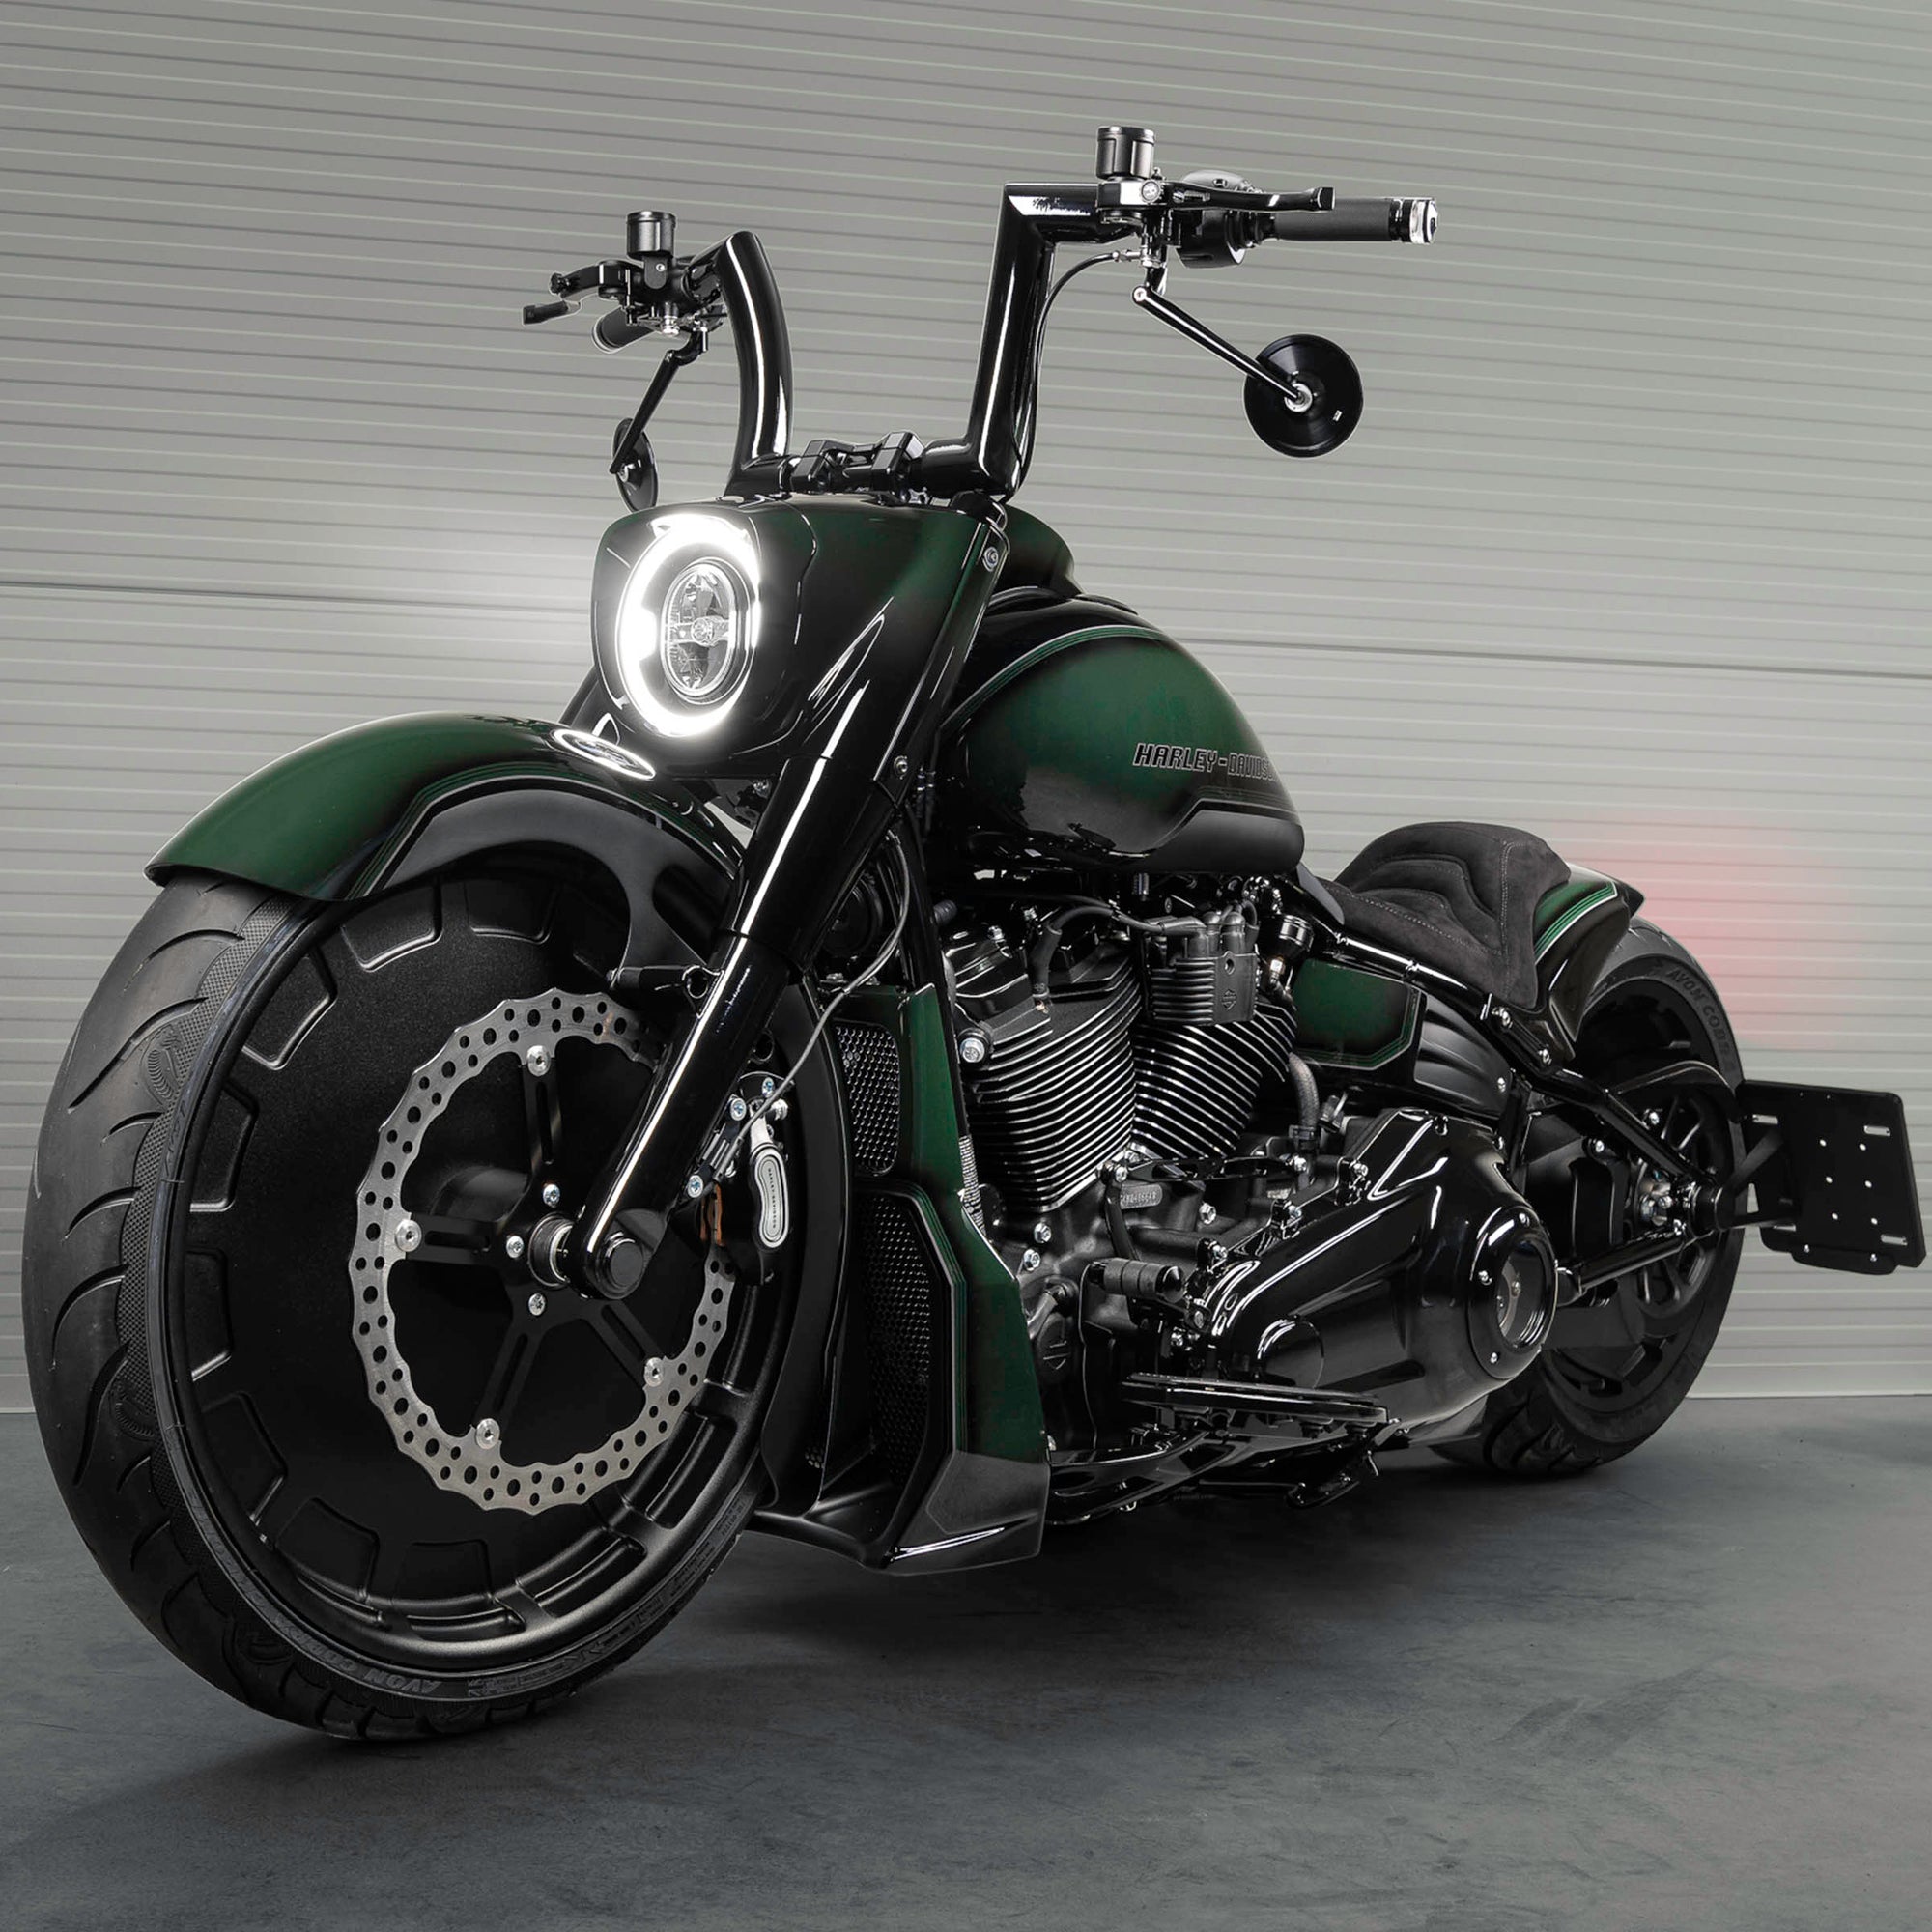 Harley Davidson motorcycle with Killer Custom parts from the front in a spacious and modern garage